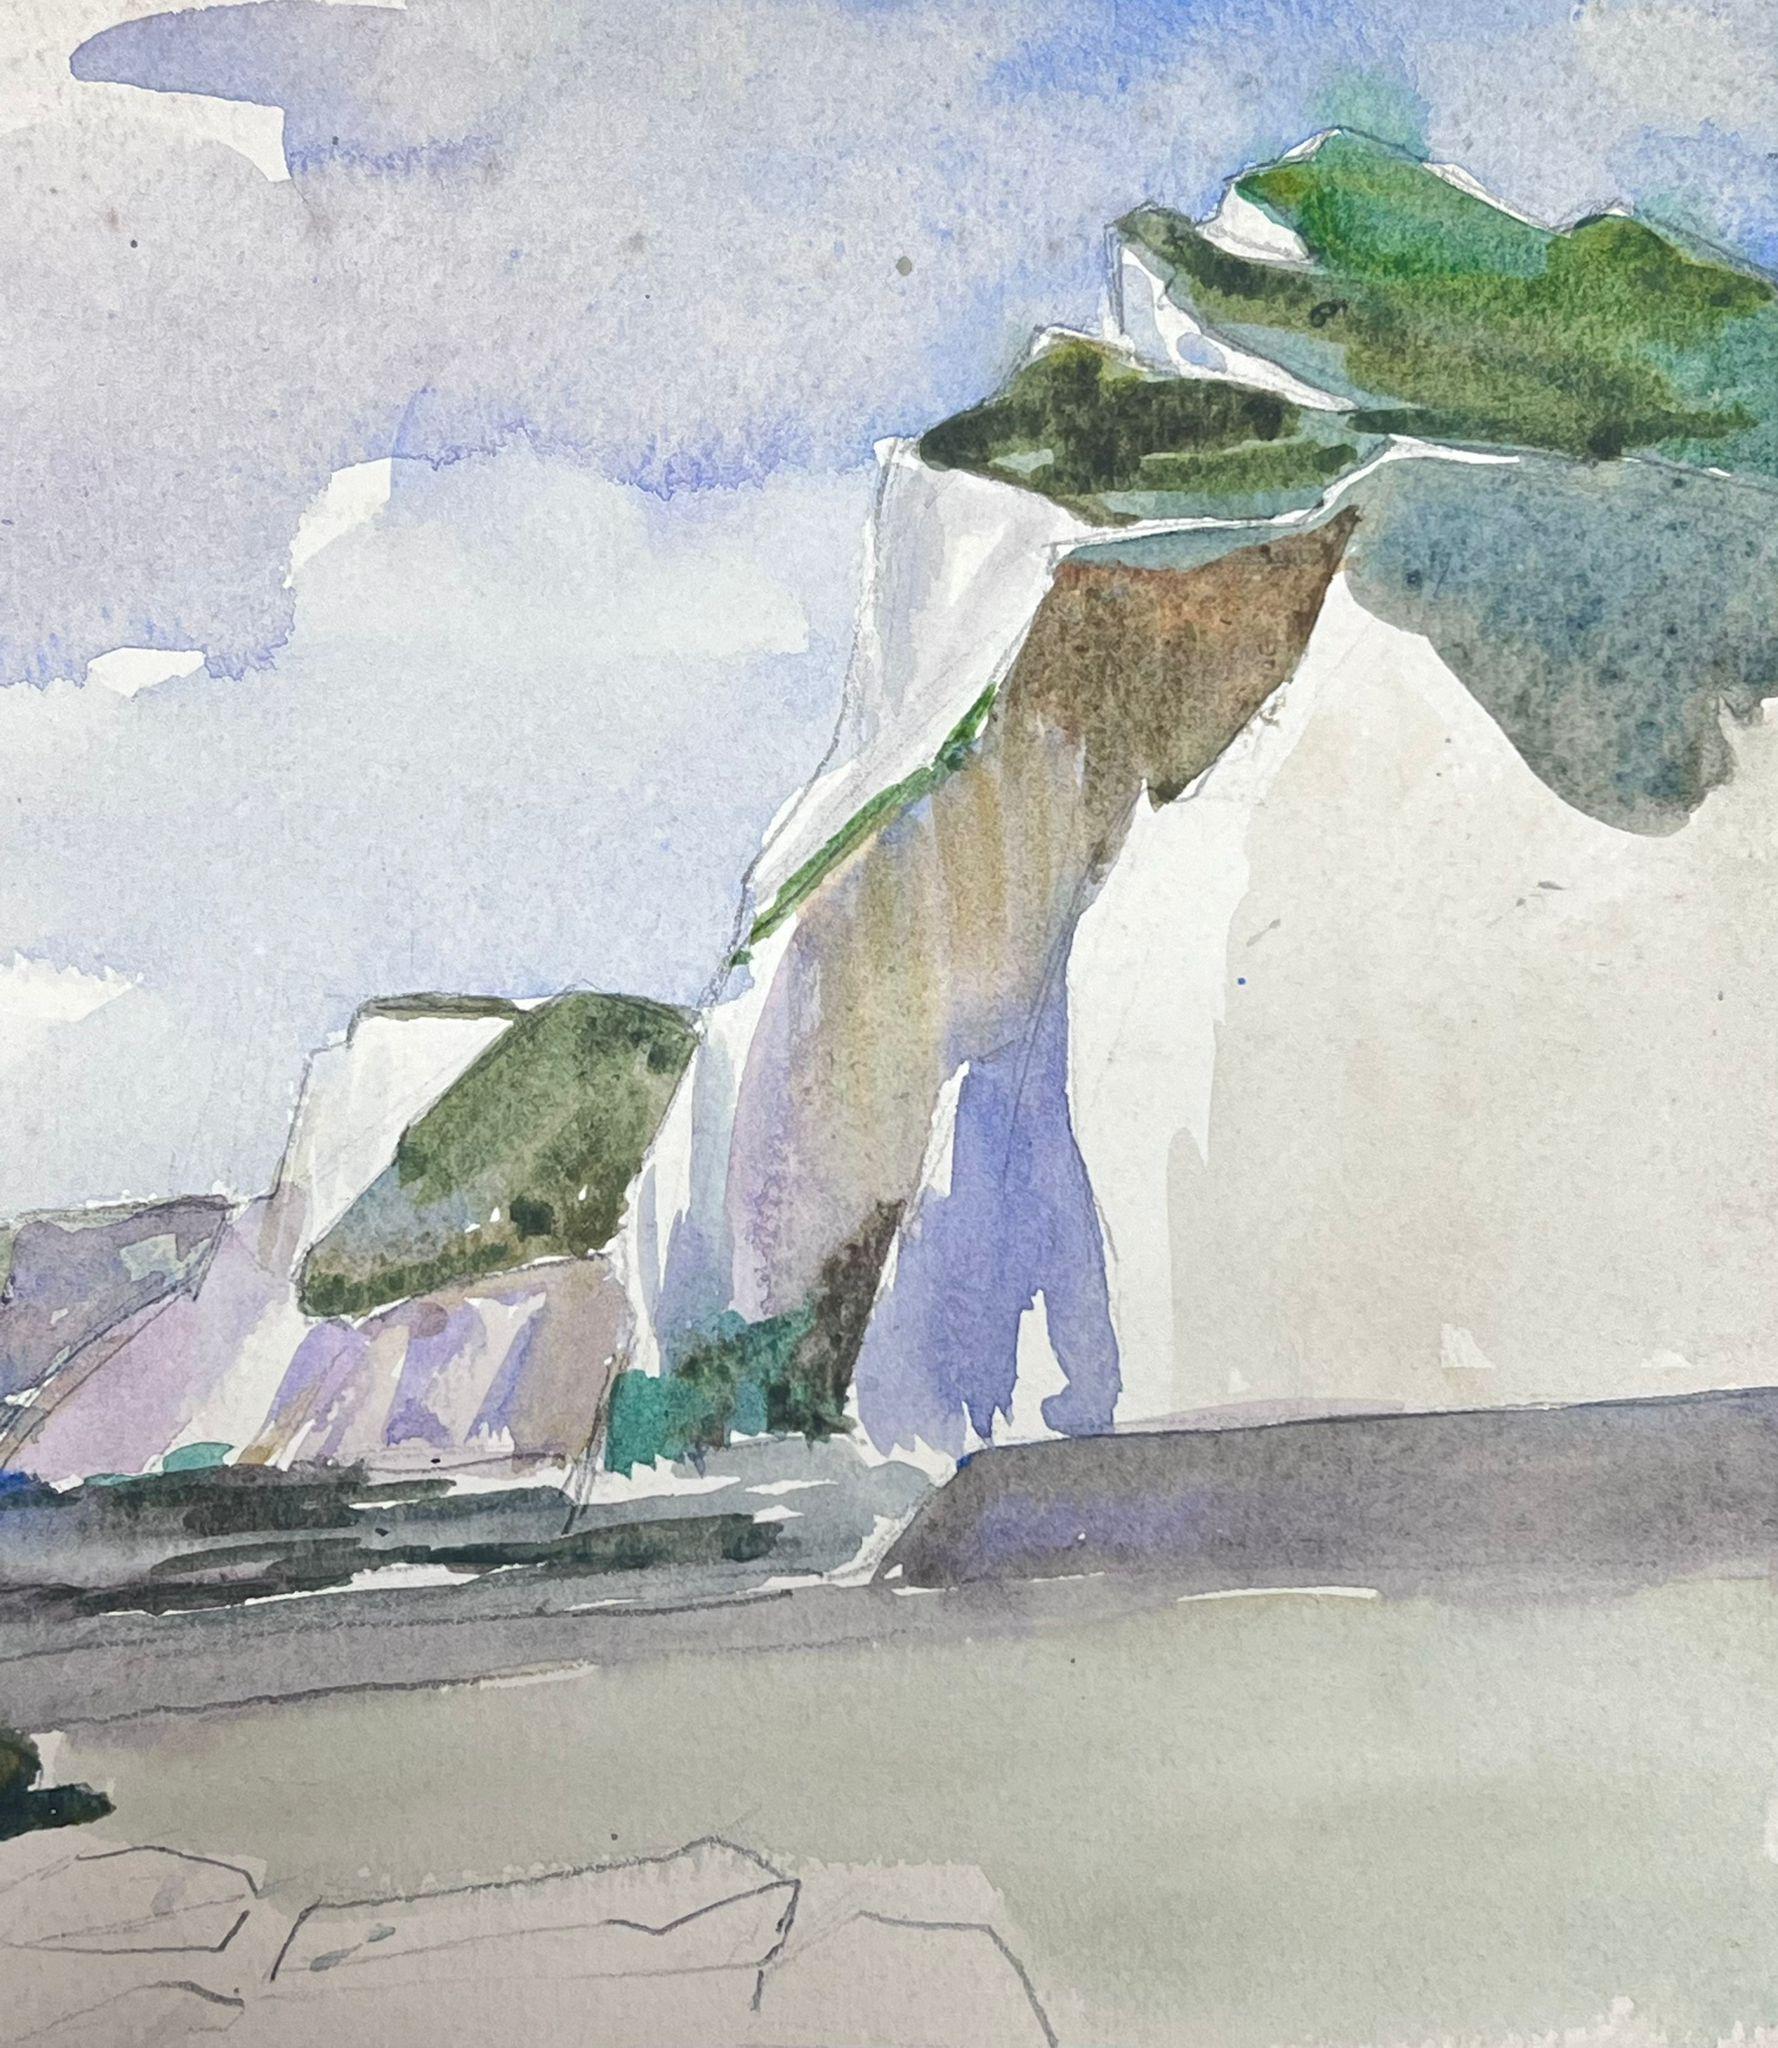 French Landscape
signed by Louise Alix (French, 1888-1980) *see notes below
provenance stamp to the back 
watercolour painting on artist paper, unframed
measures: 10 high by 7 inches wide
condition: overall very good and sound, a few scuffs and